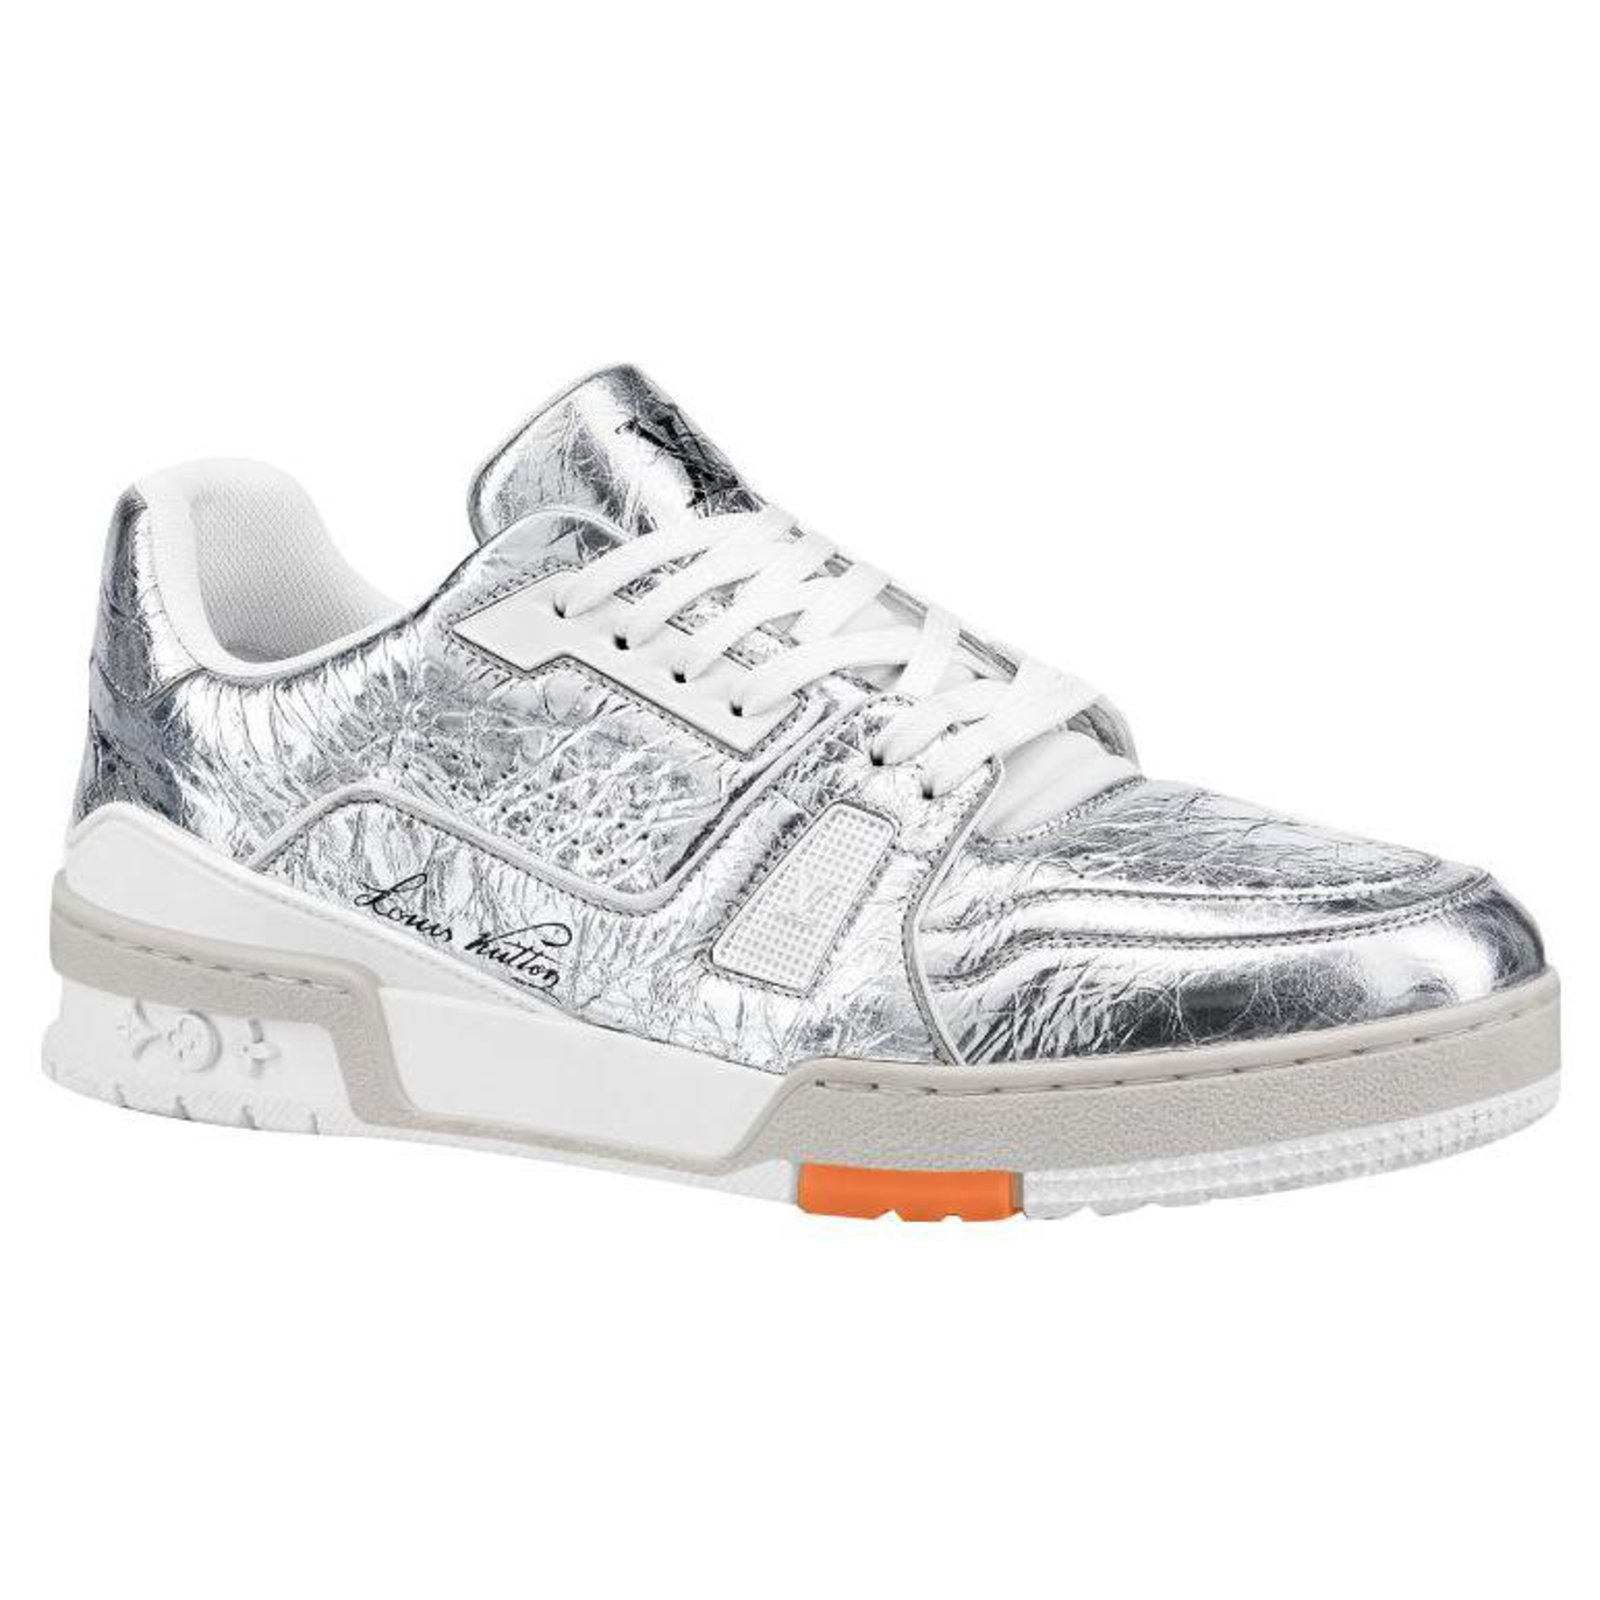 Louis Vuitton LV/Trainers Sneakers